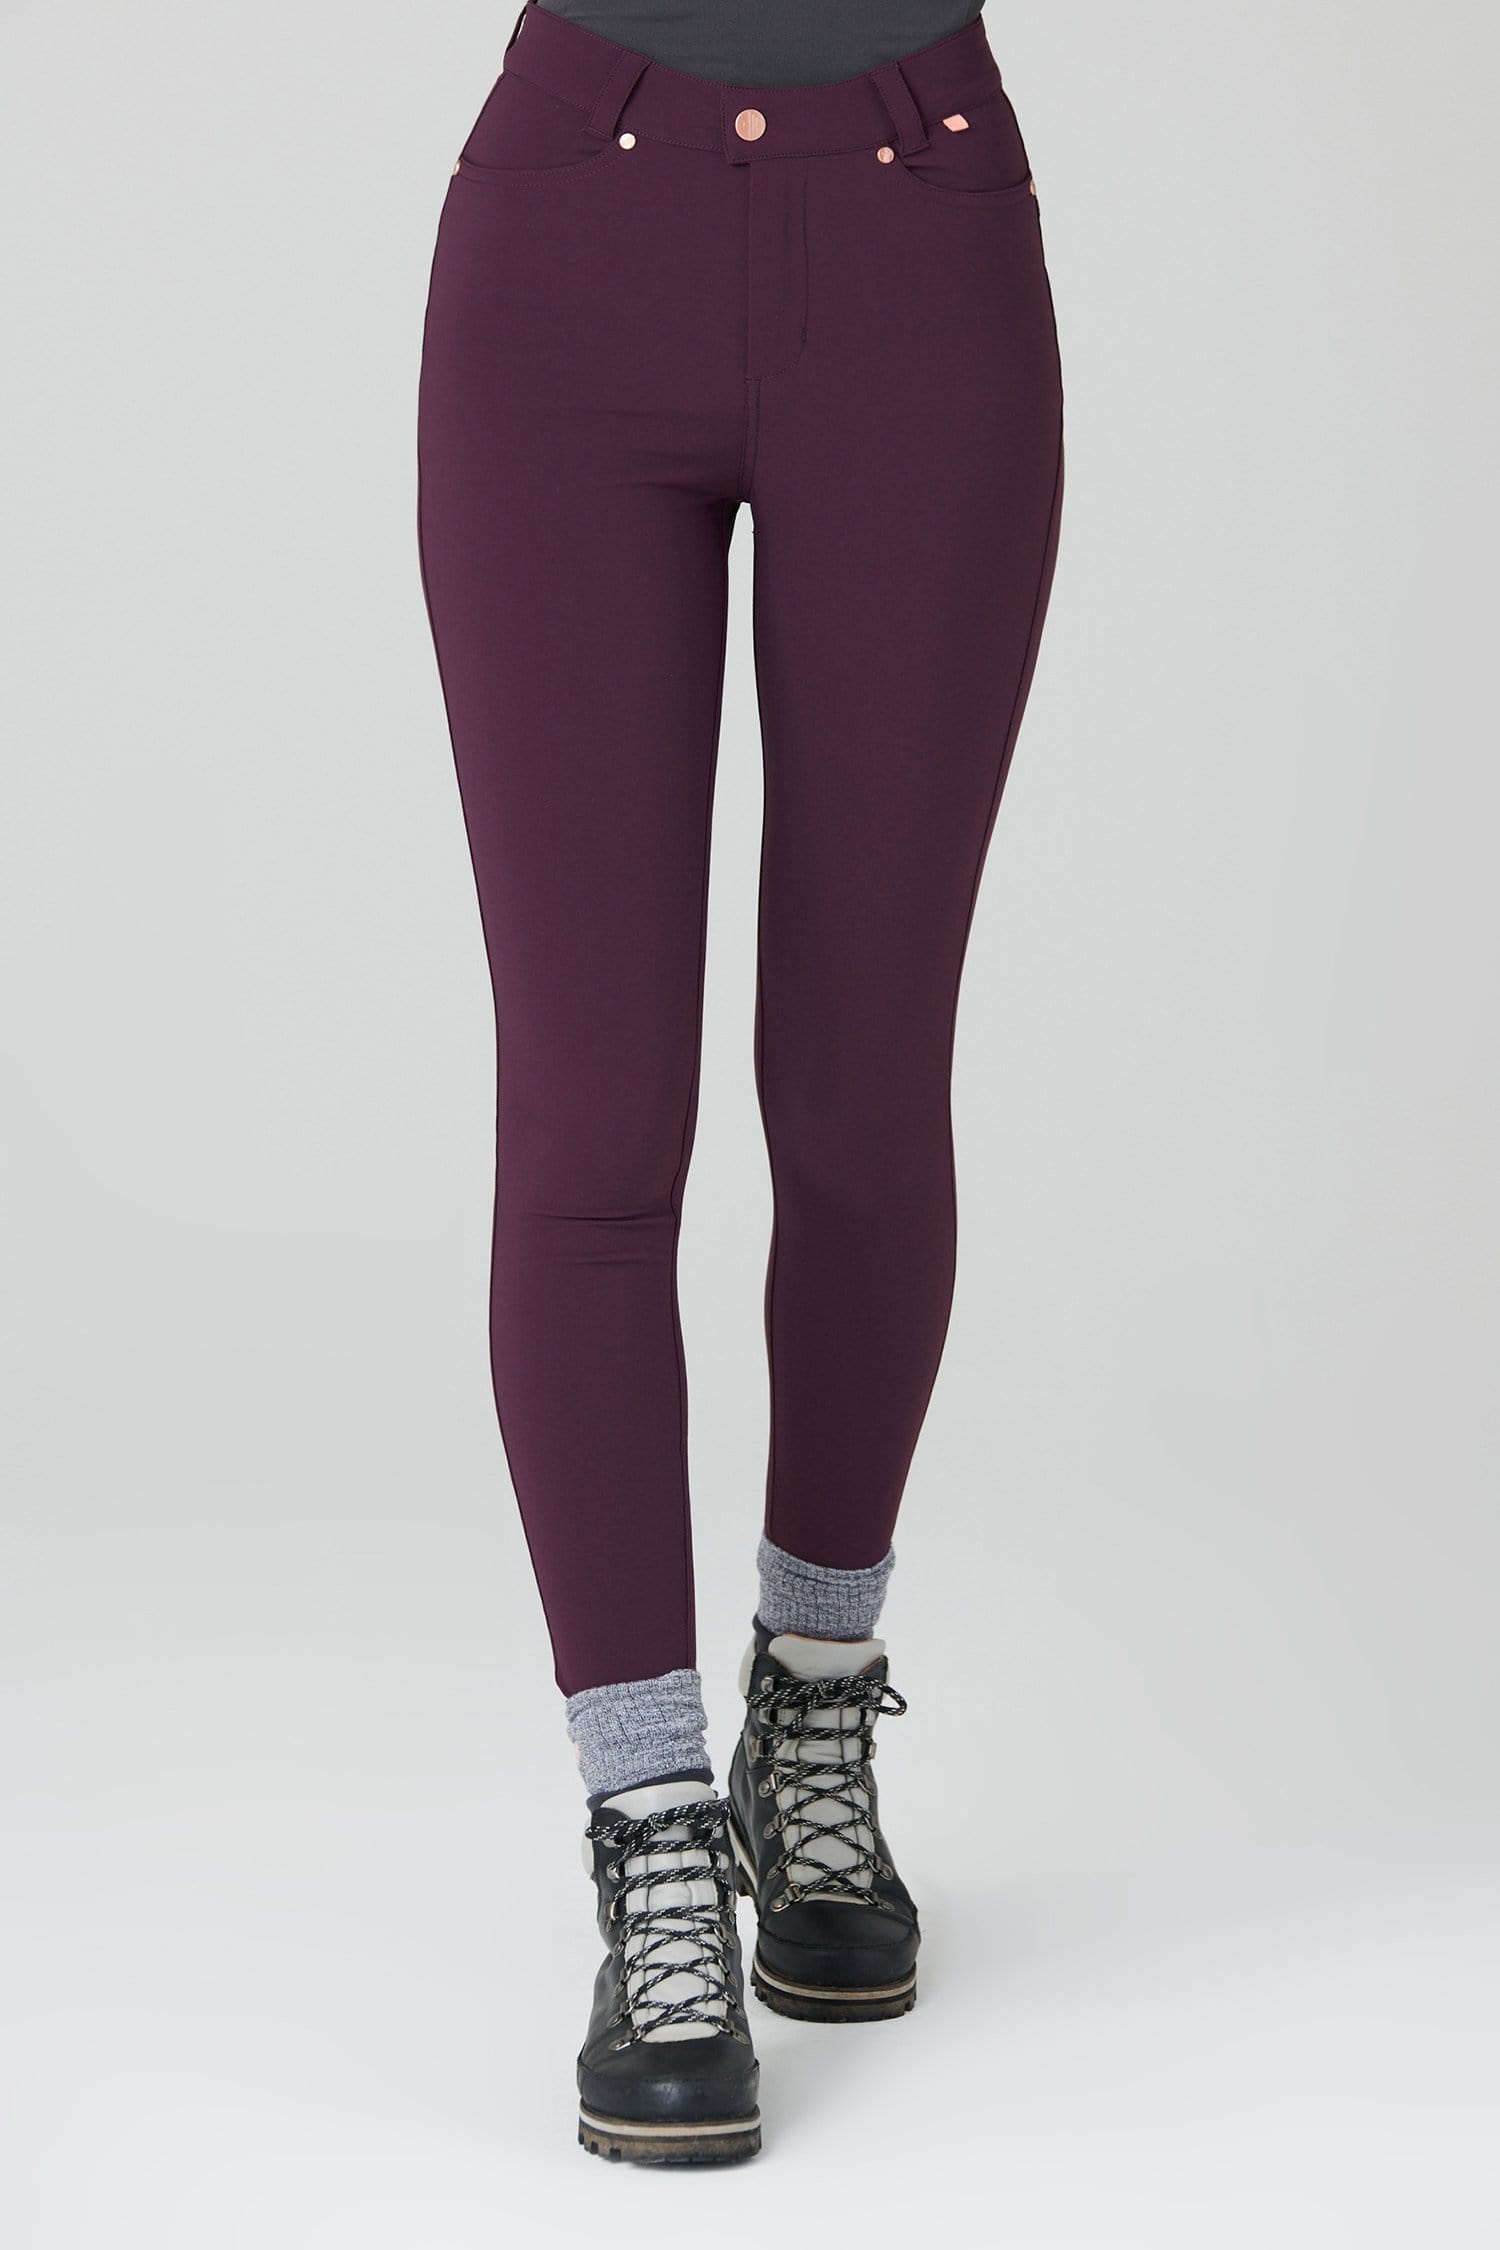 Max Stretch Skinny Outdoor Trousers - Aubergine - 32r / Uk14 - Womens - Acai Outdoorwear